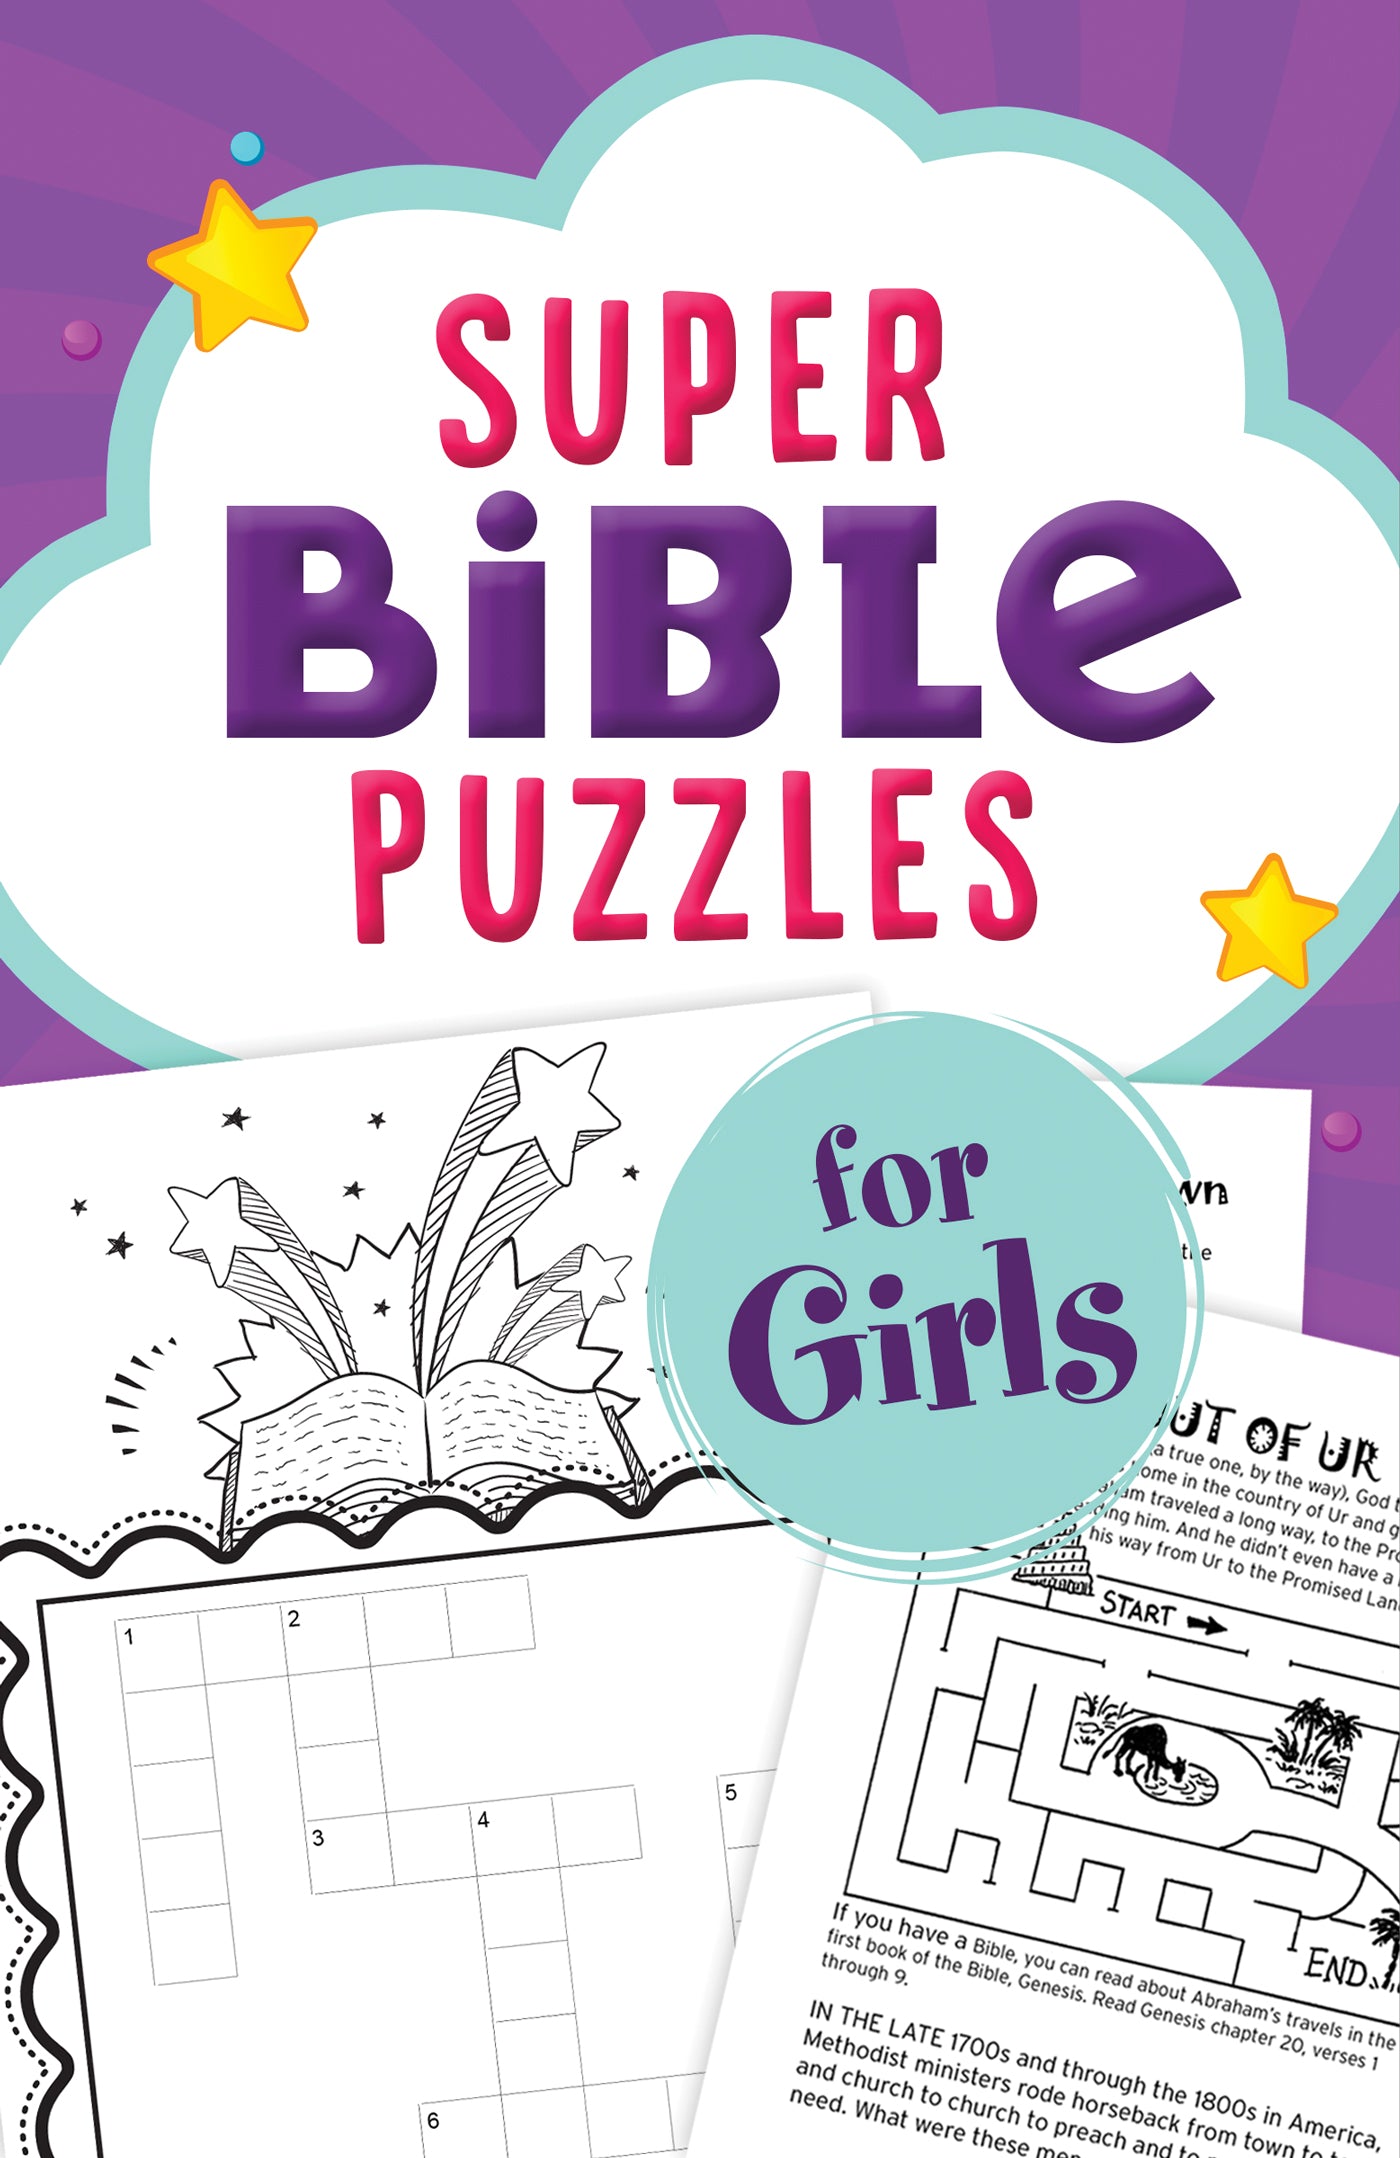 Super Bible Puzzles for Girls - Mercantile Mountain